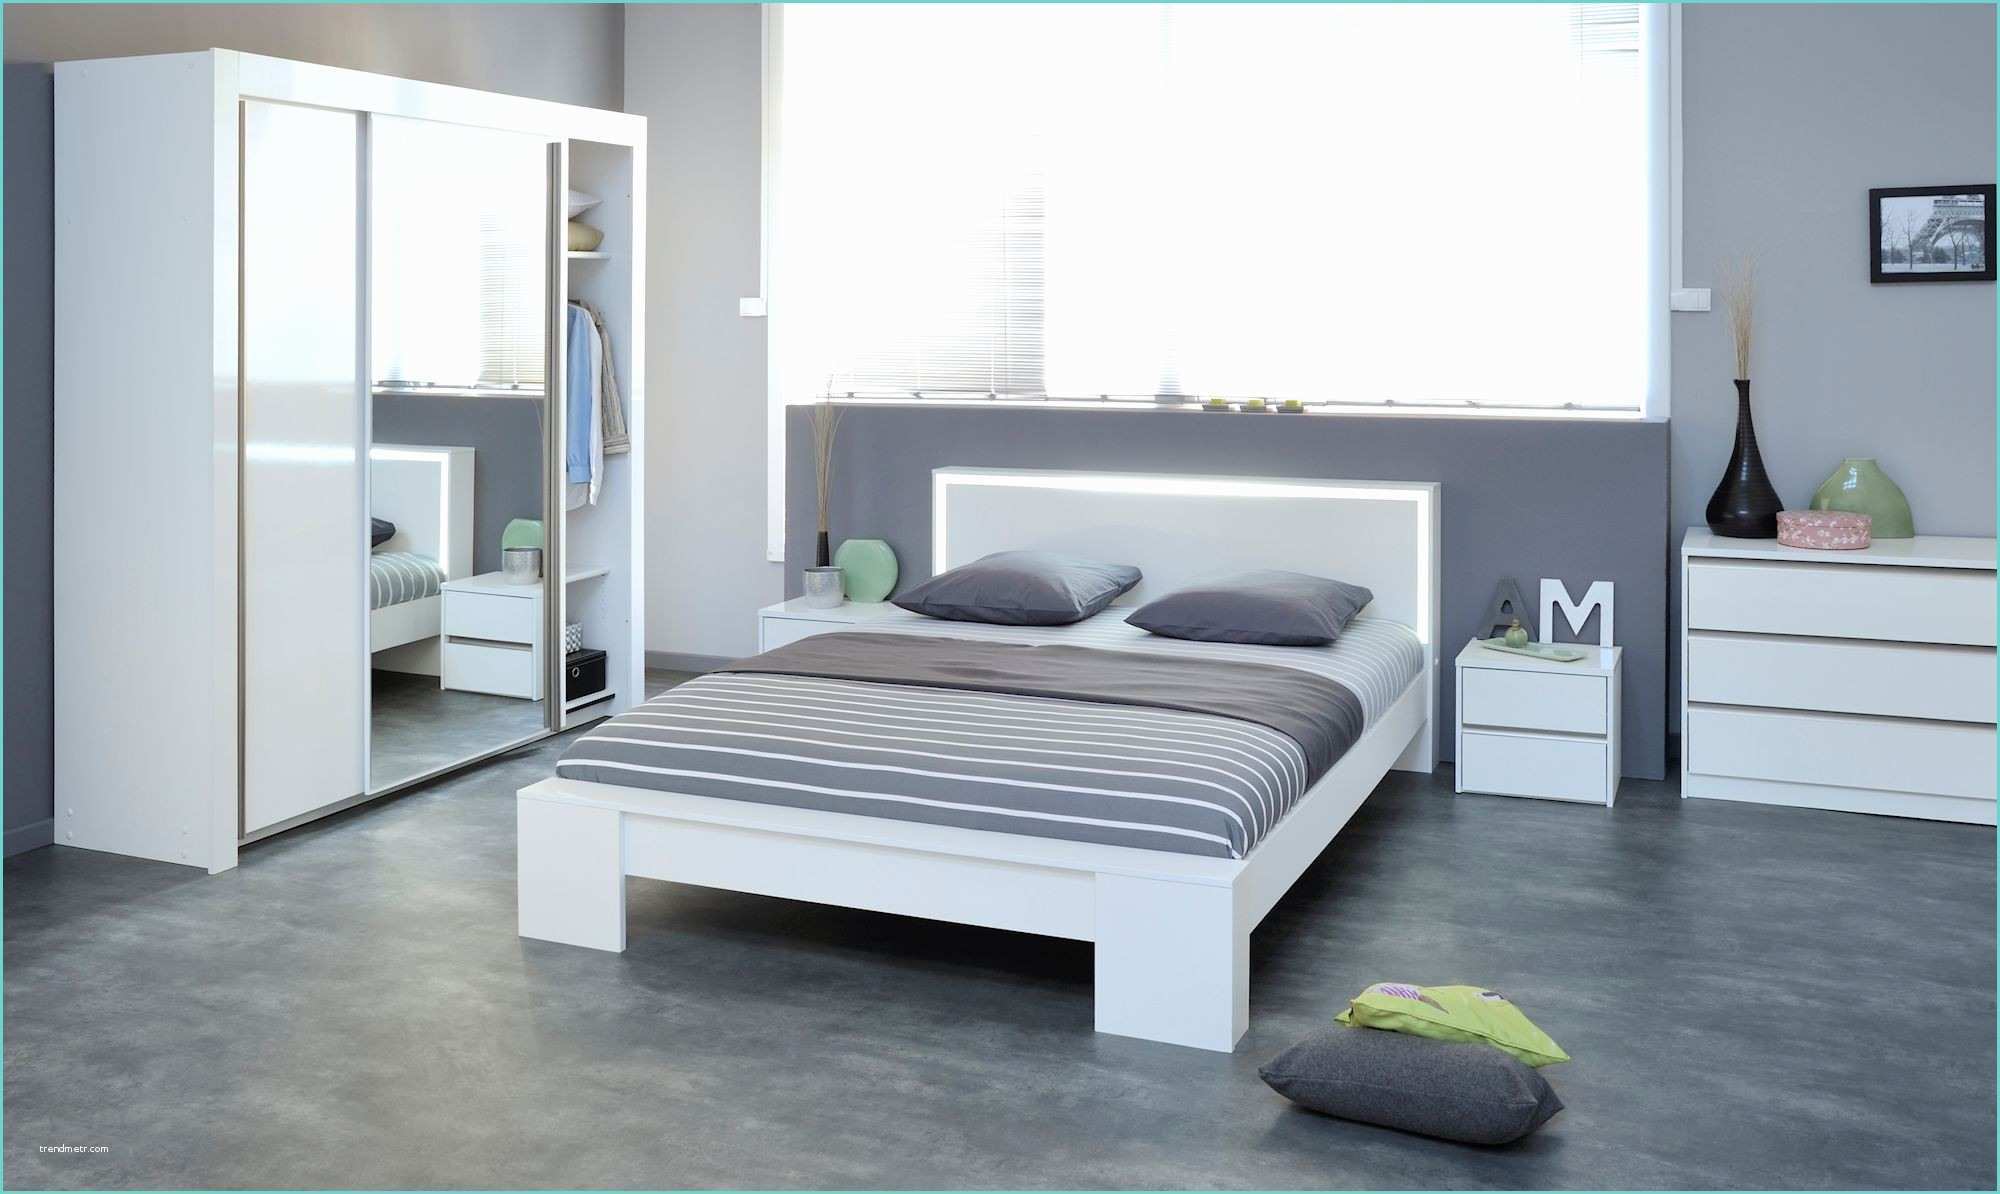 Chambre Coucher Chambre Ikea Adulte Finest Idees D Chambre Chambre Adulte